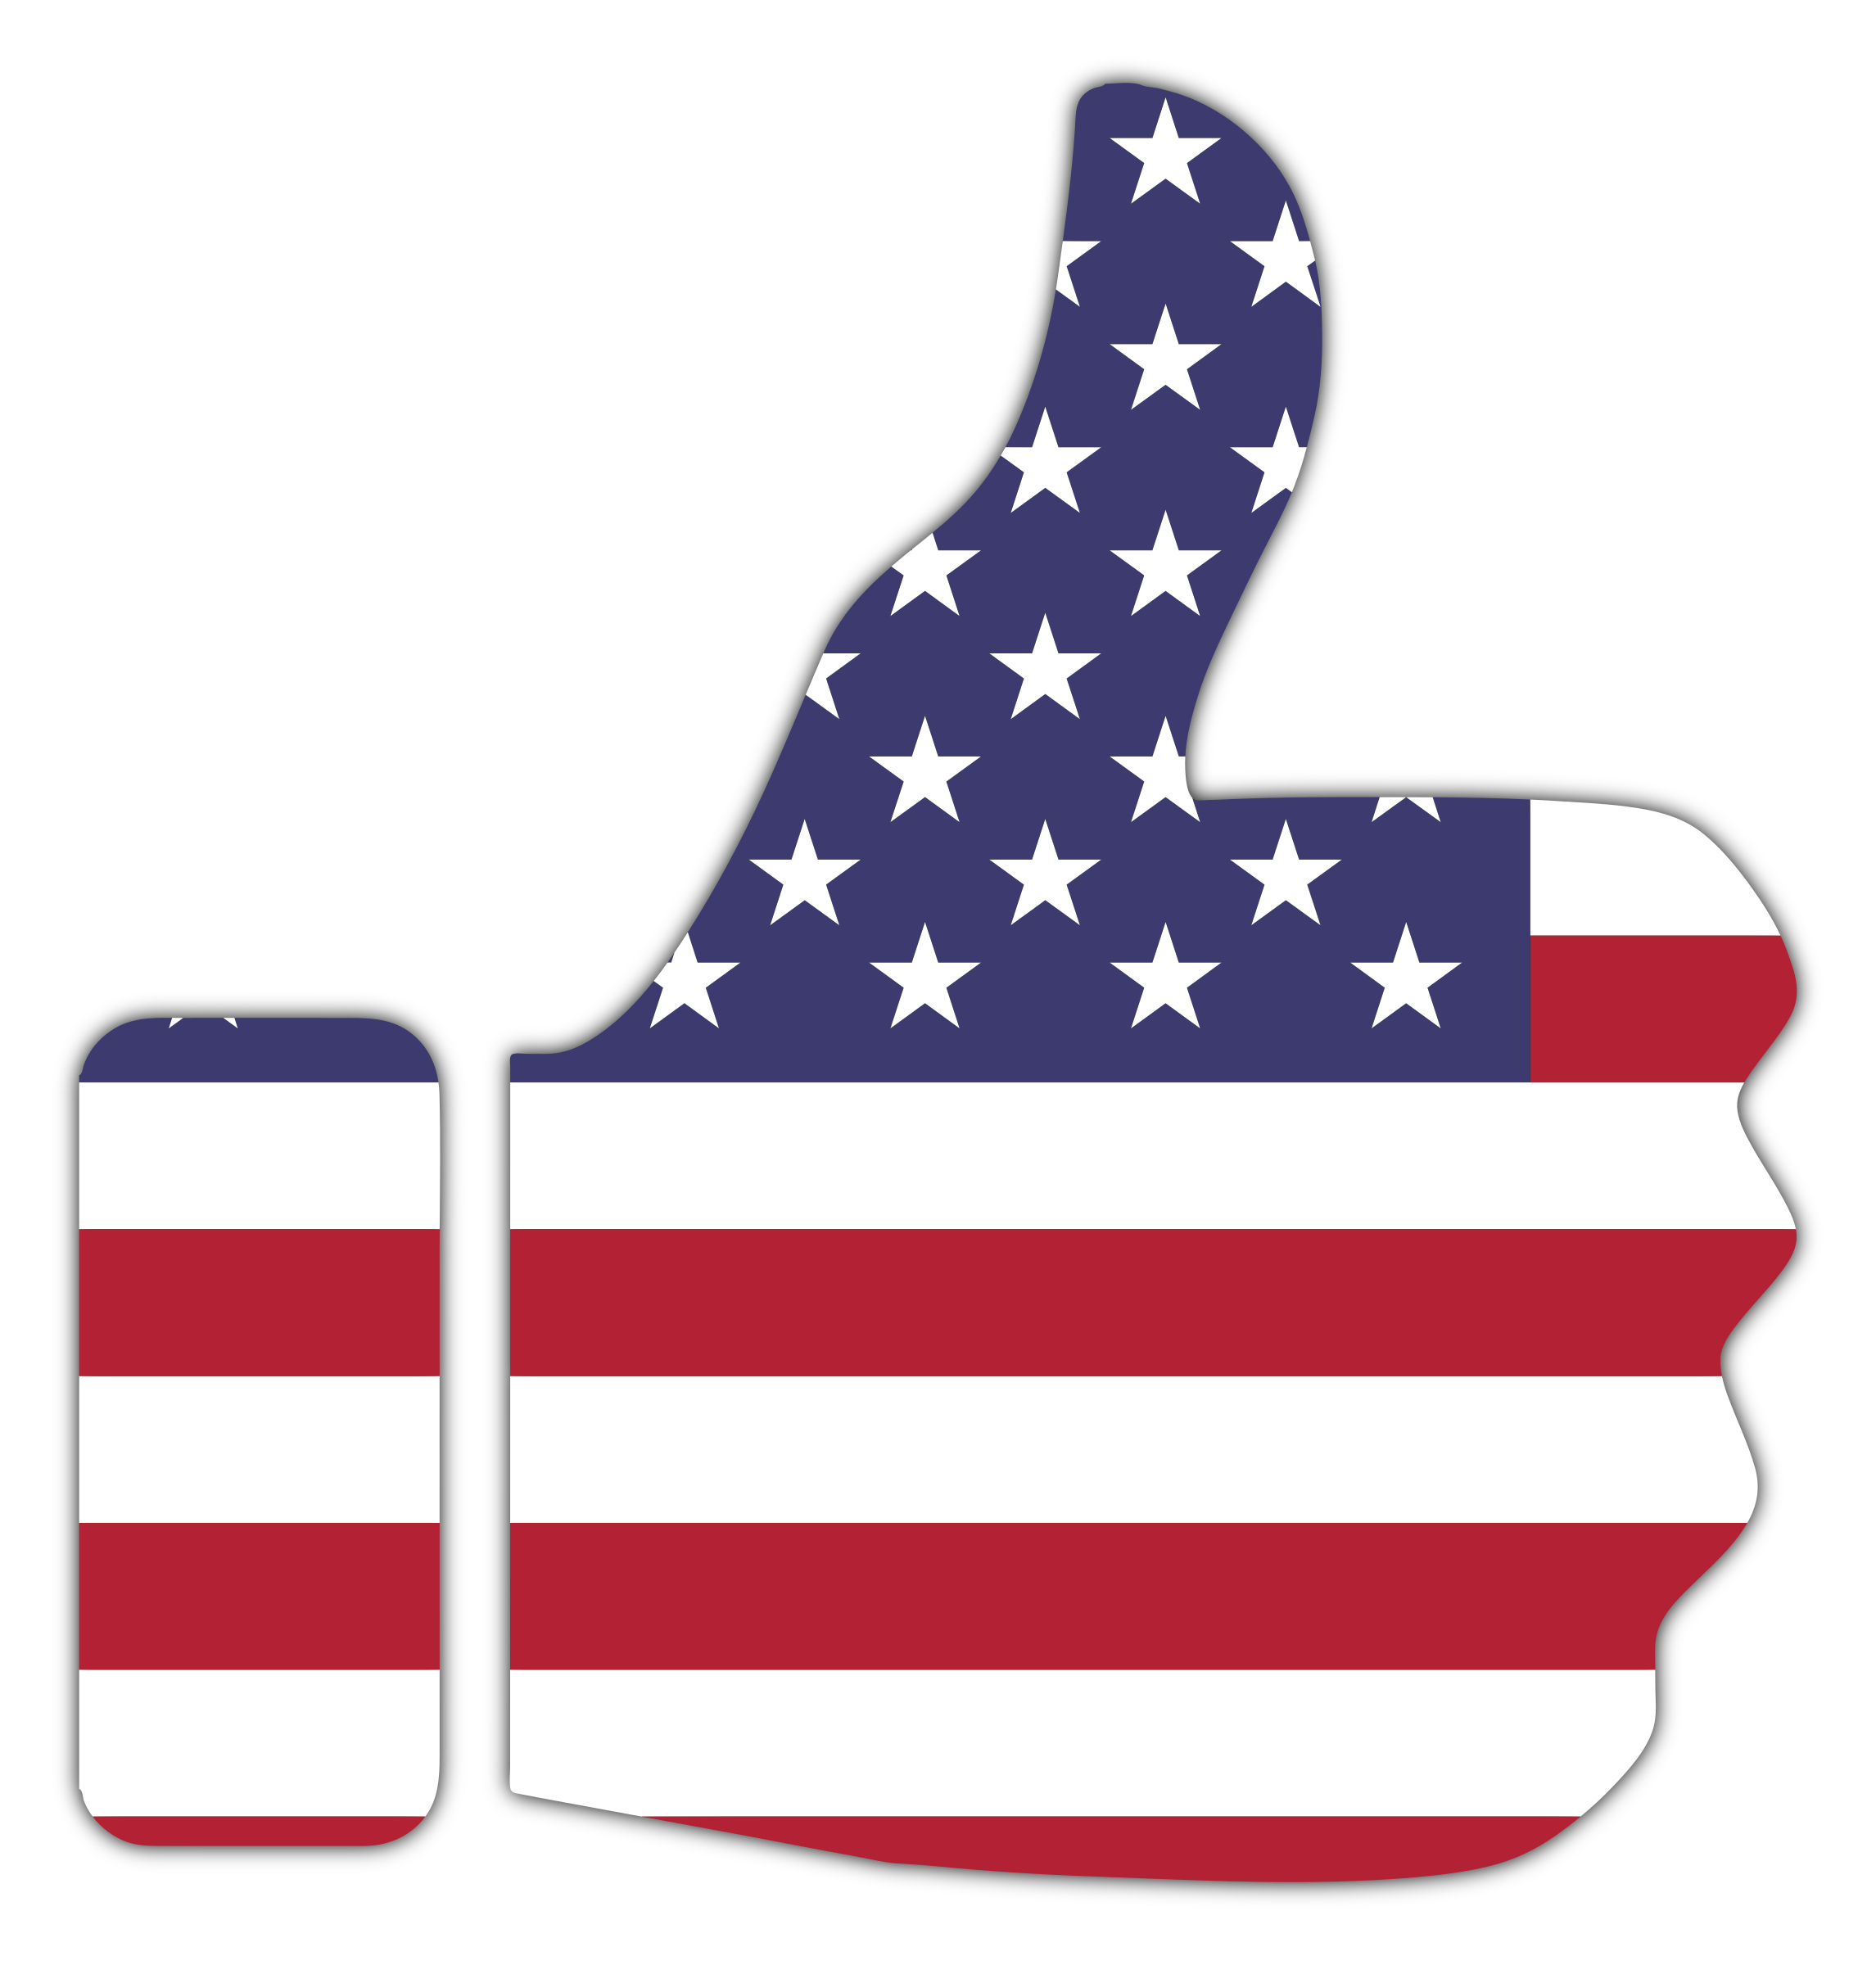 Thumbs-Up-American-Flag-With-Drop-Shadow.png